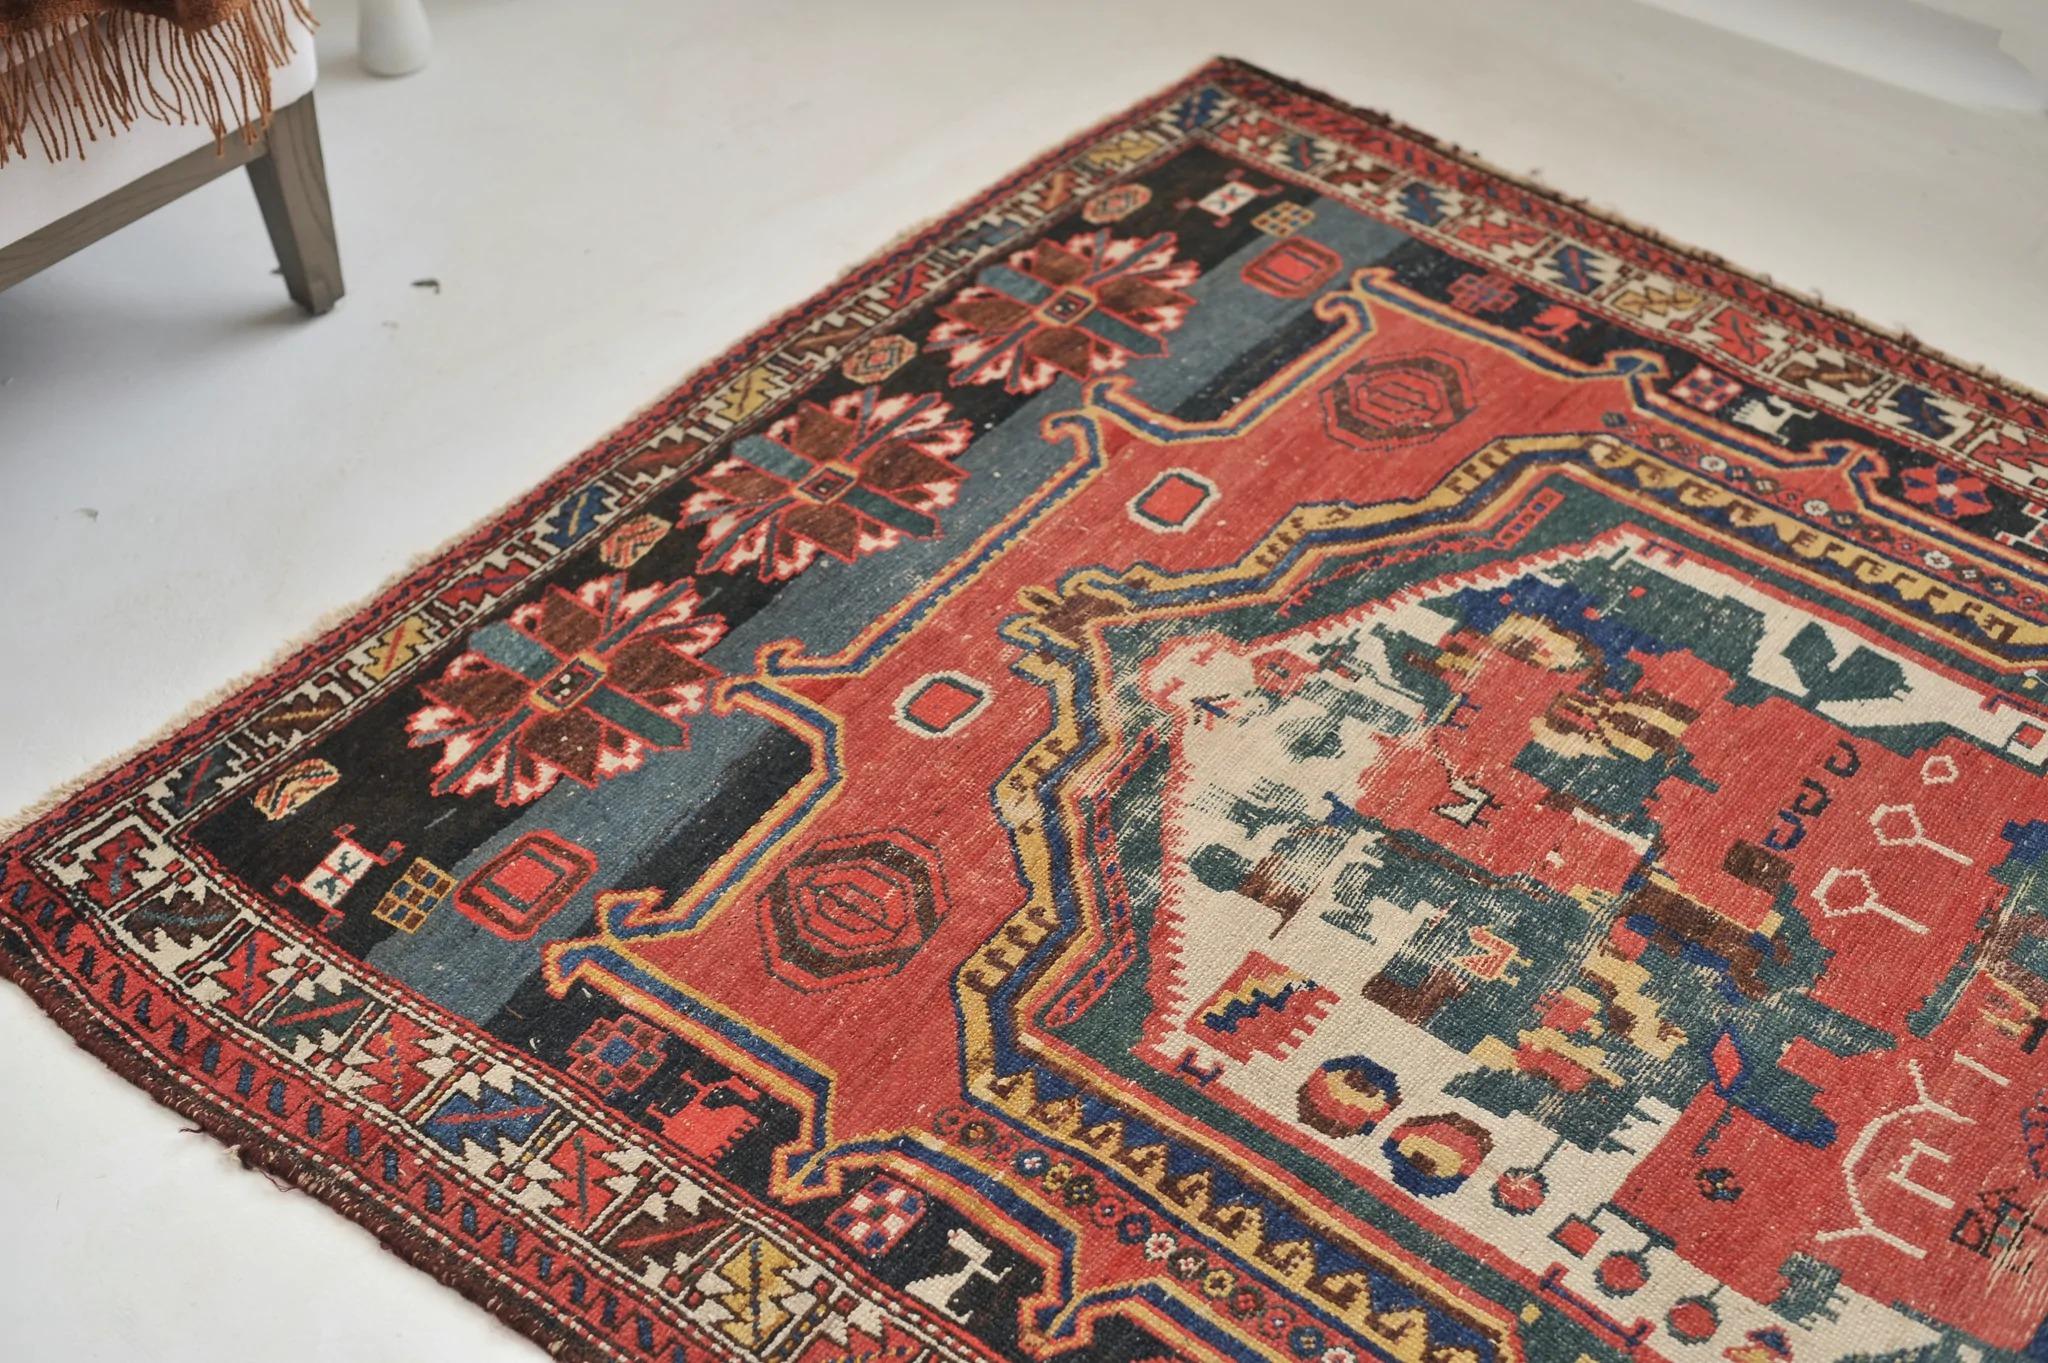 Folklore Wonderful Landscape Depiction Village Antique Abstract-like Rug In Good Condition For Sale In Milwaukee, WI